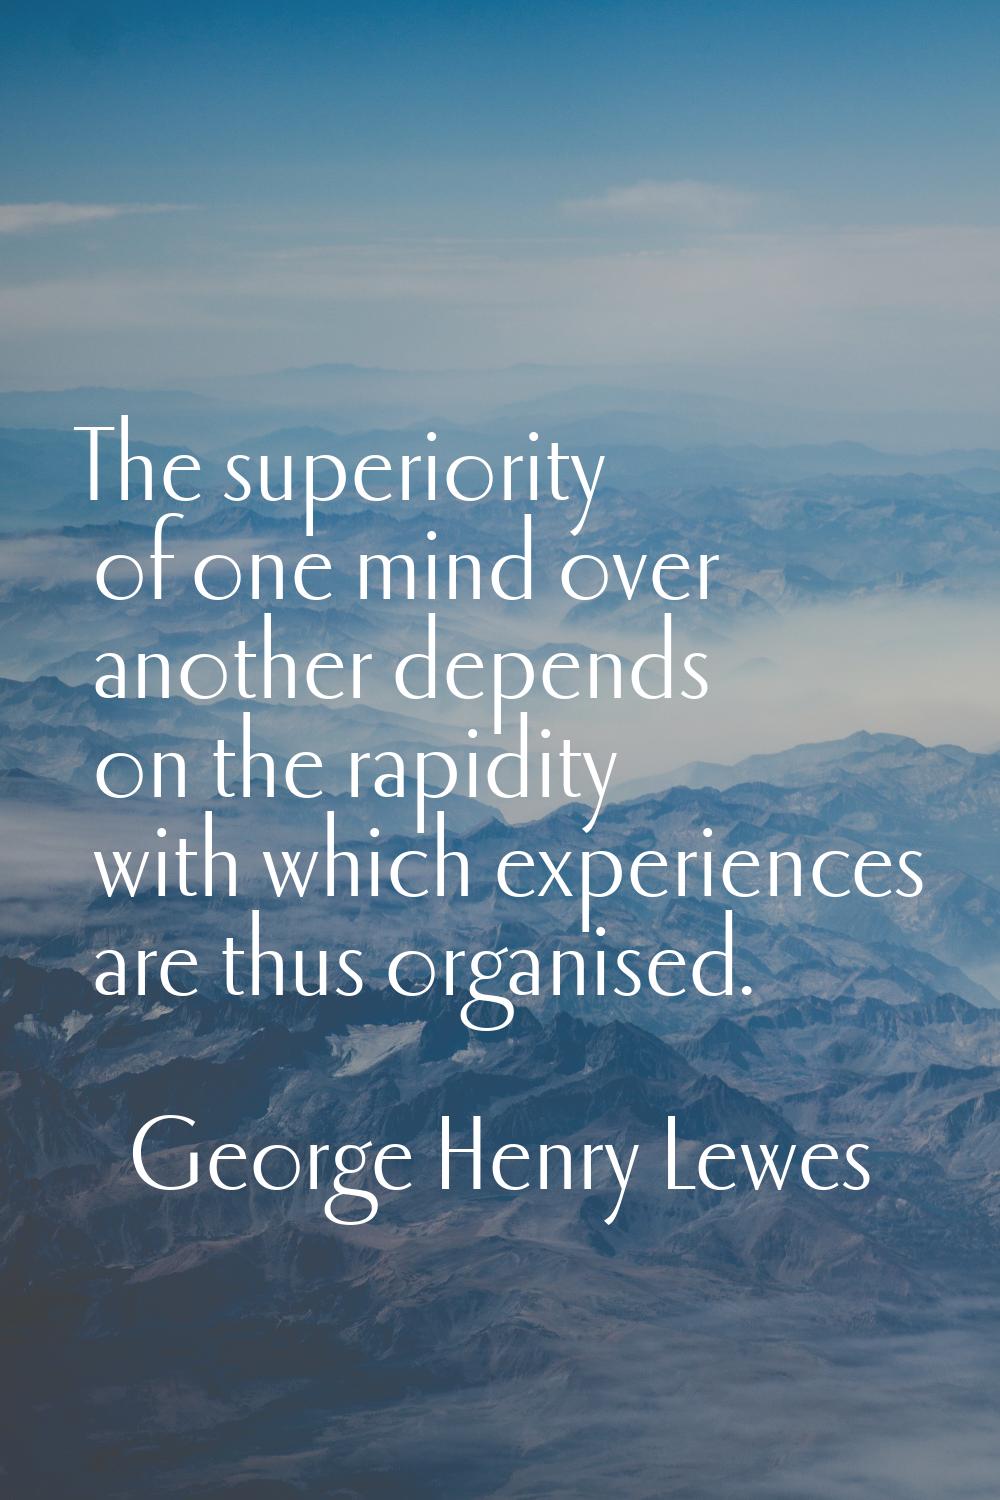 The superiority of one mind over another depends on the rapidity with which experiences are thus or